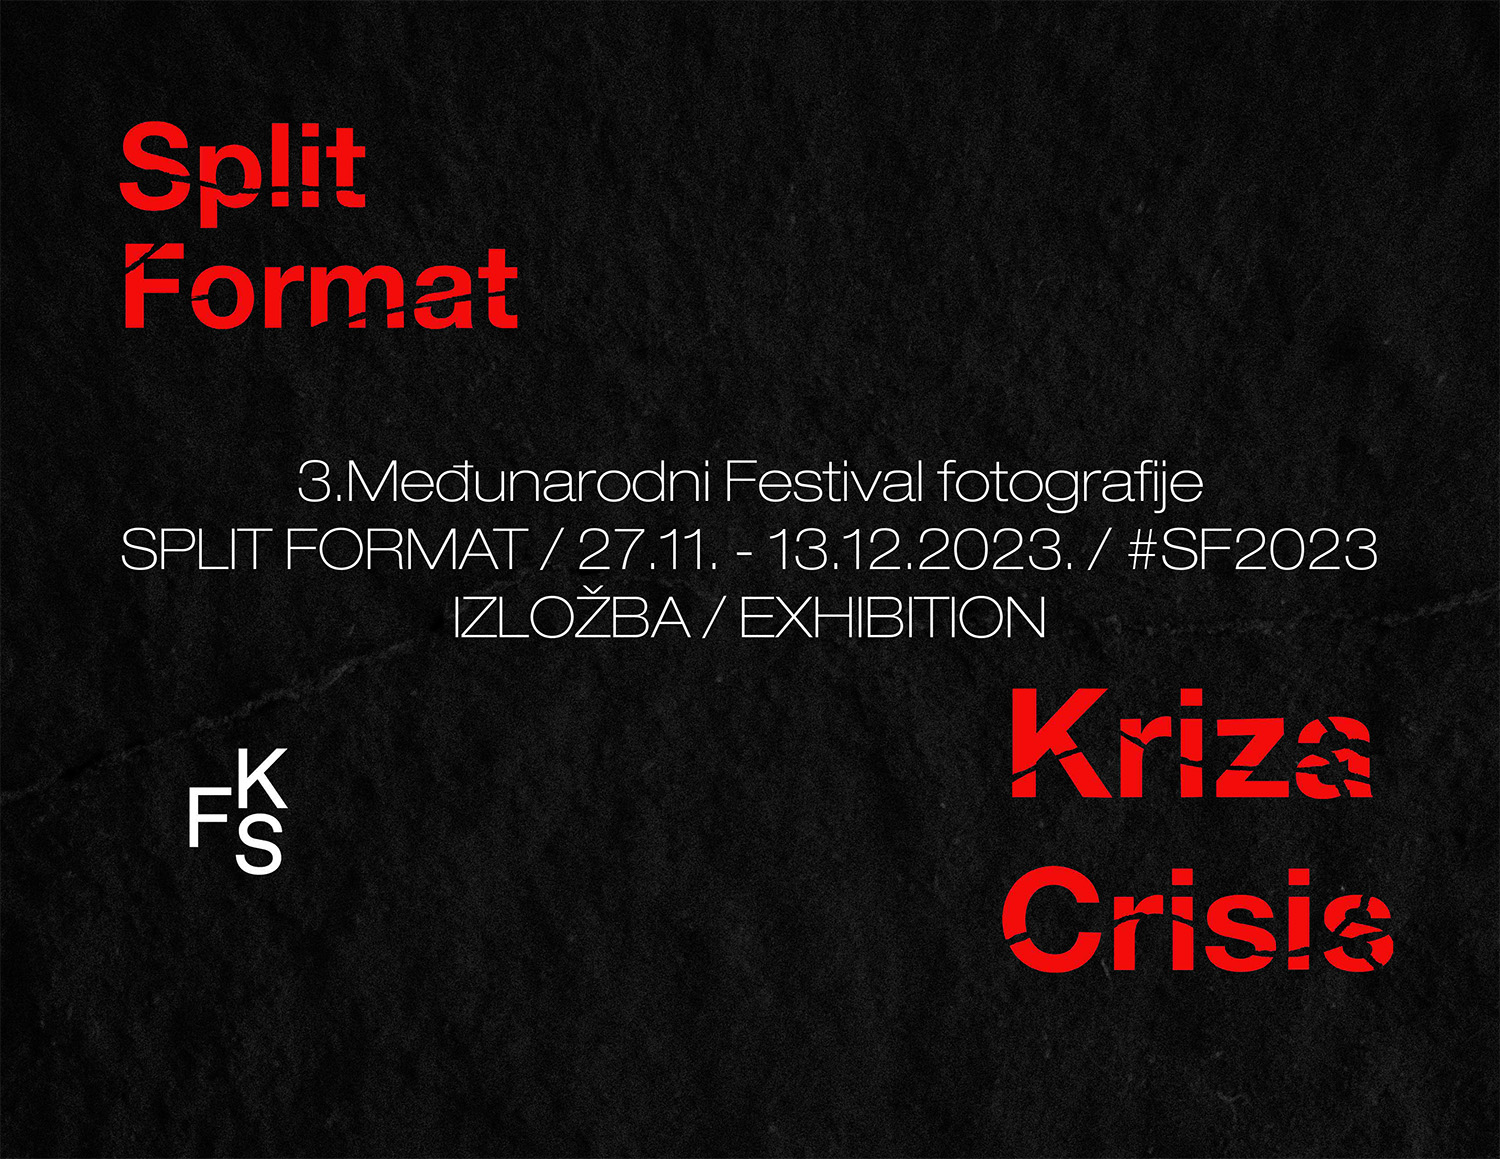 Take a look at the catalog of the 3rd Split Format